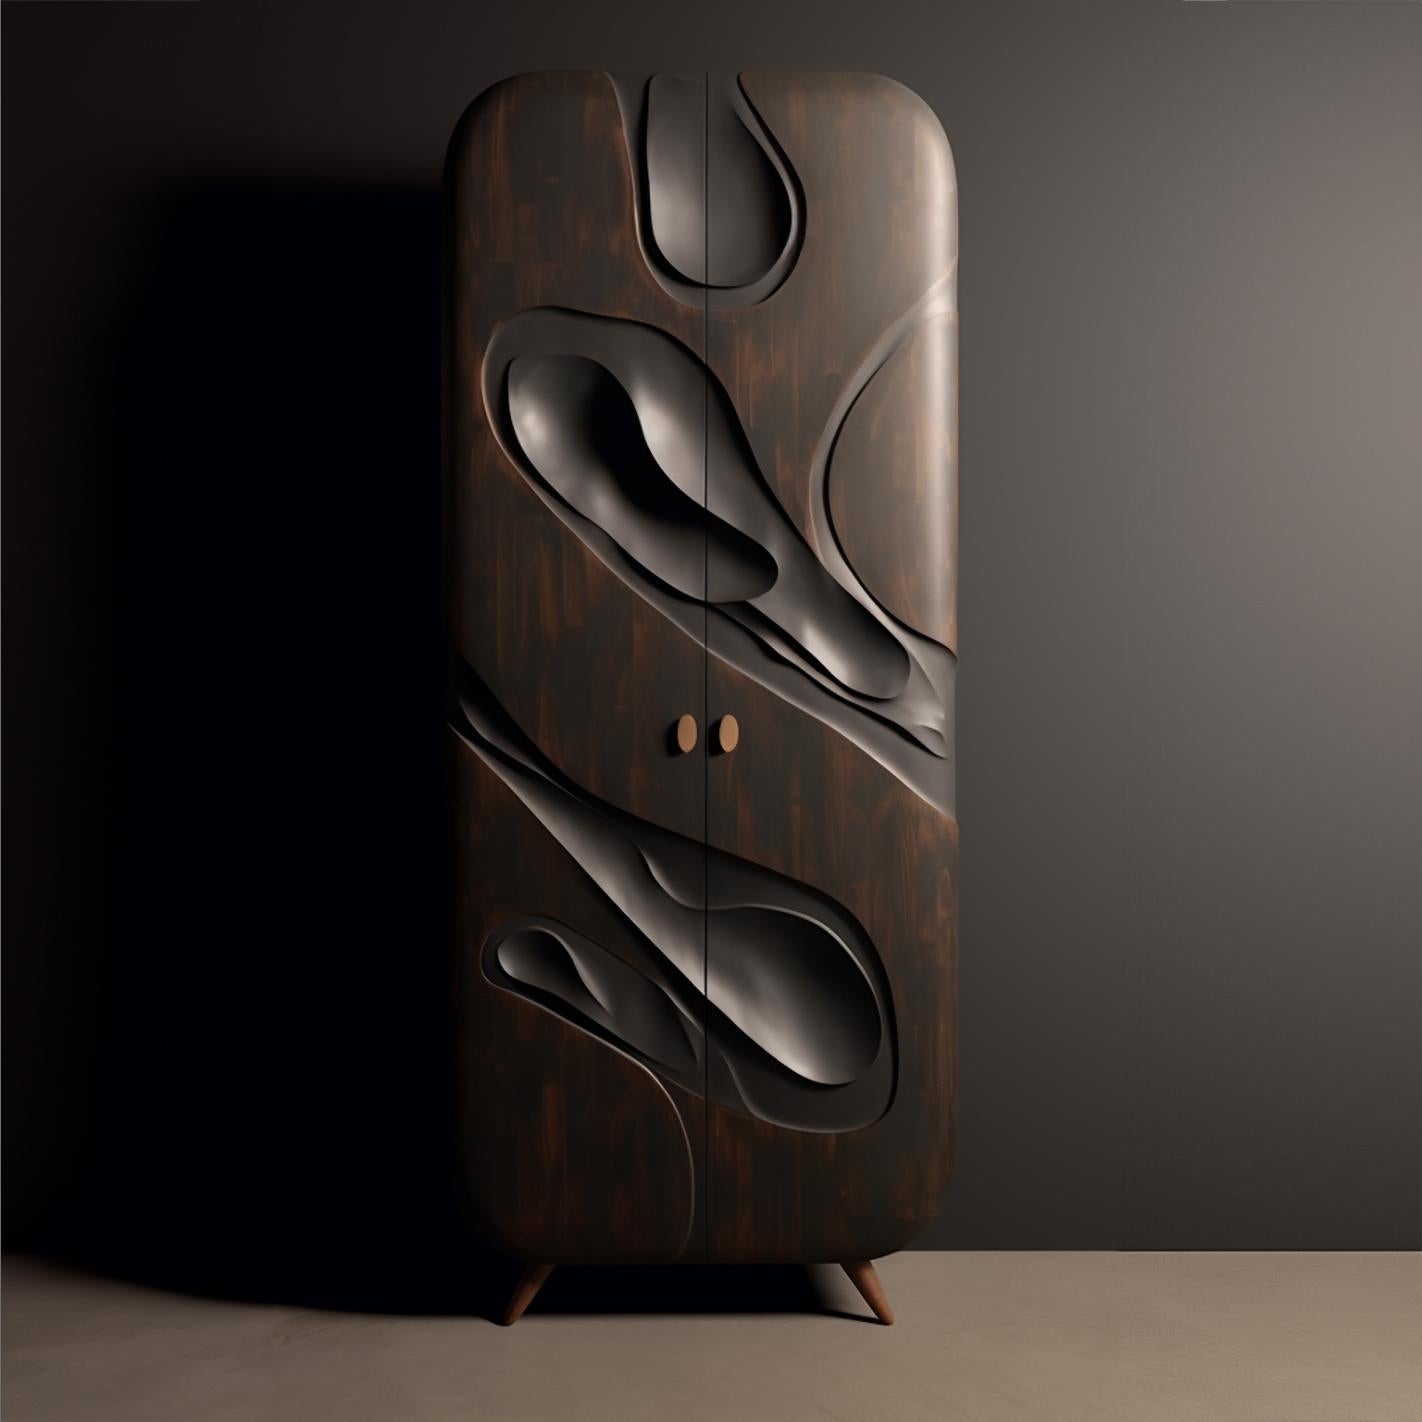 Oceanic cabinets 

In the sculpted undulations of this limited edition oak cabinet lies the profound narrative of our planet's most vast and mysterious expanse: the ocean. Crafted with precision from recycled oak wood, its form echoes the waves that